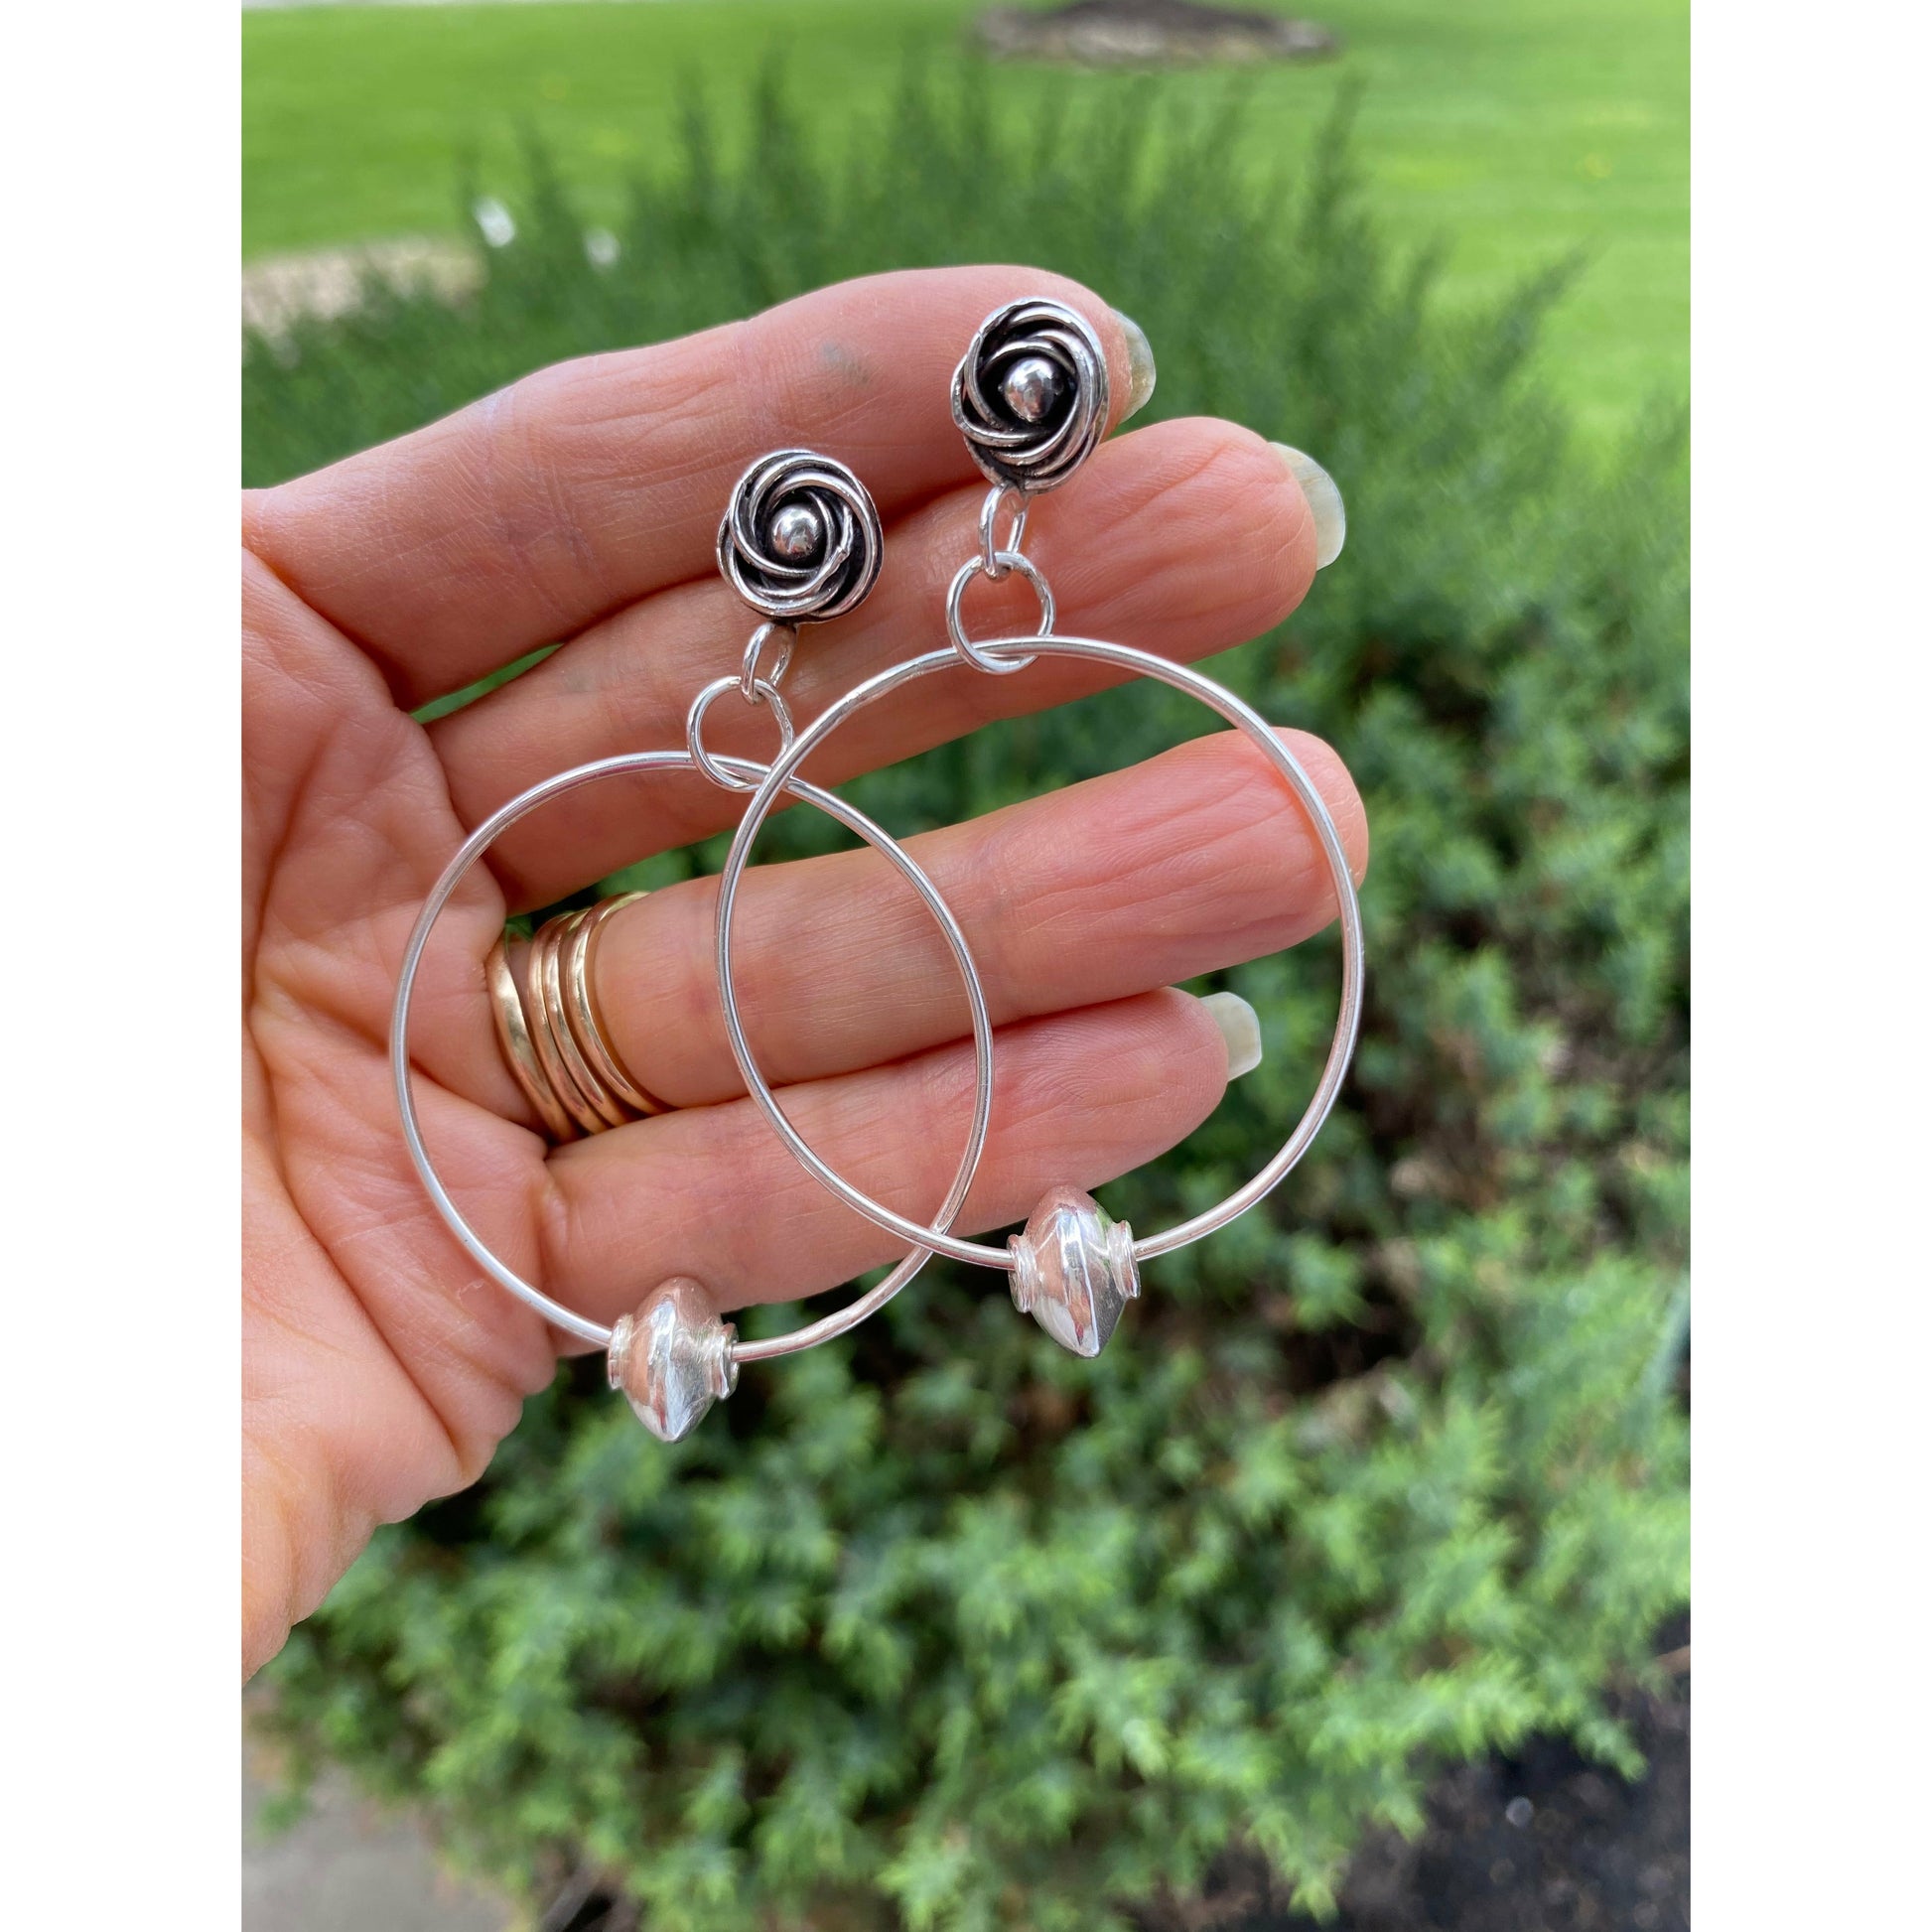 Large Hoop Earrings with Decorative Rosettes and Sterling Beads - Fine/Sterling Silver